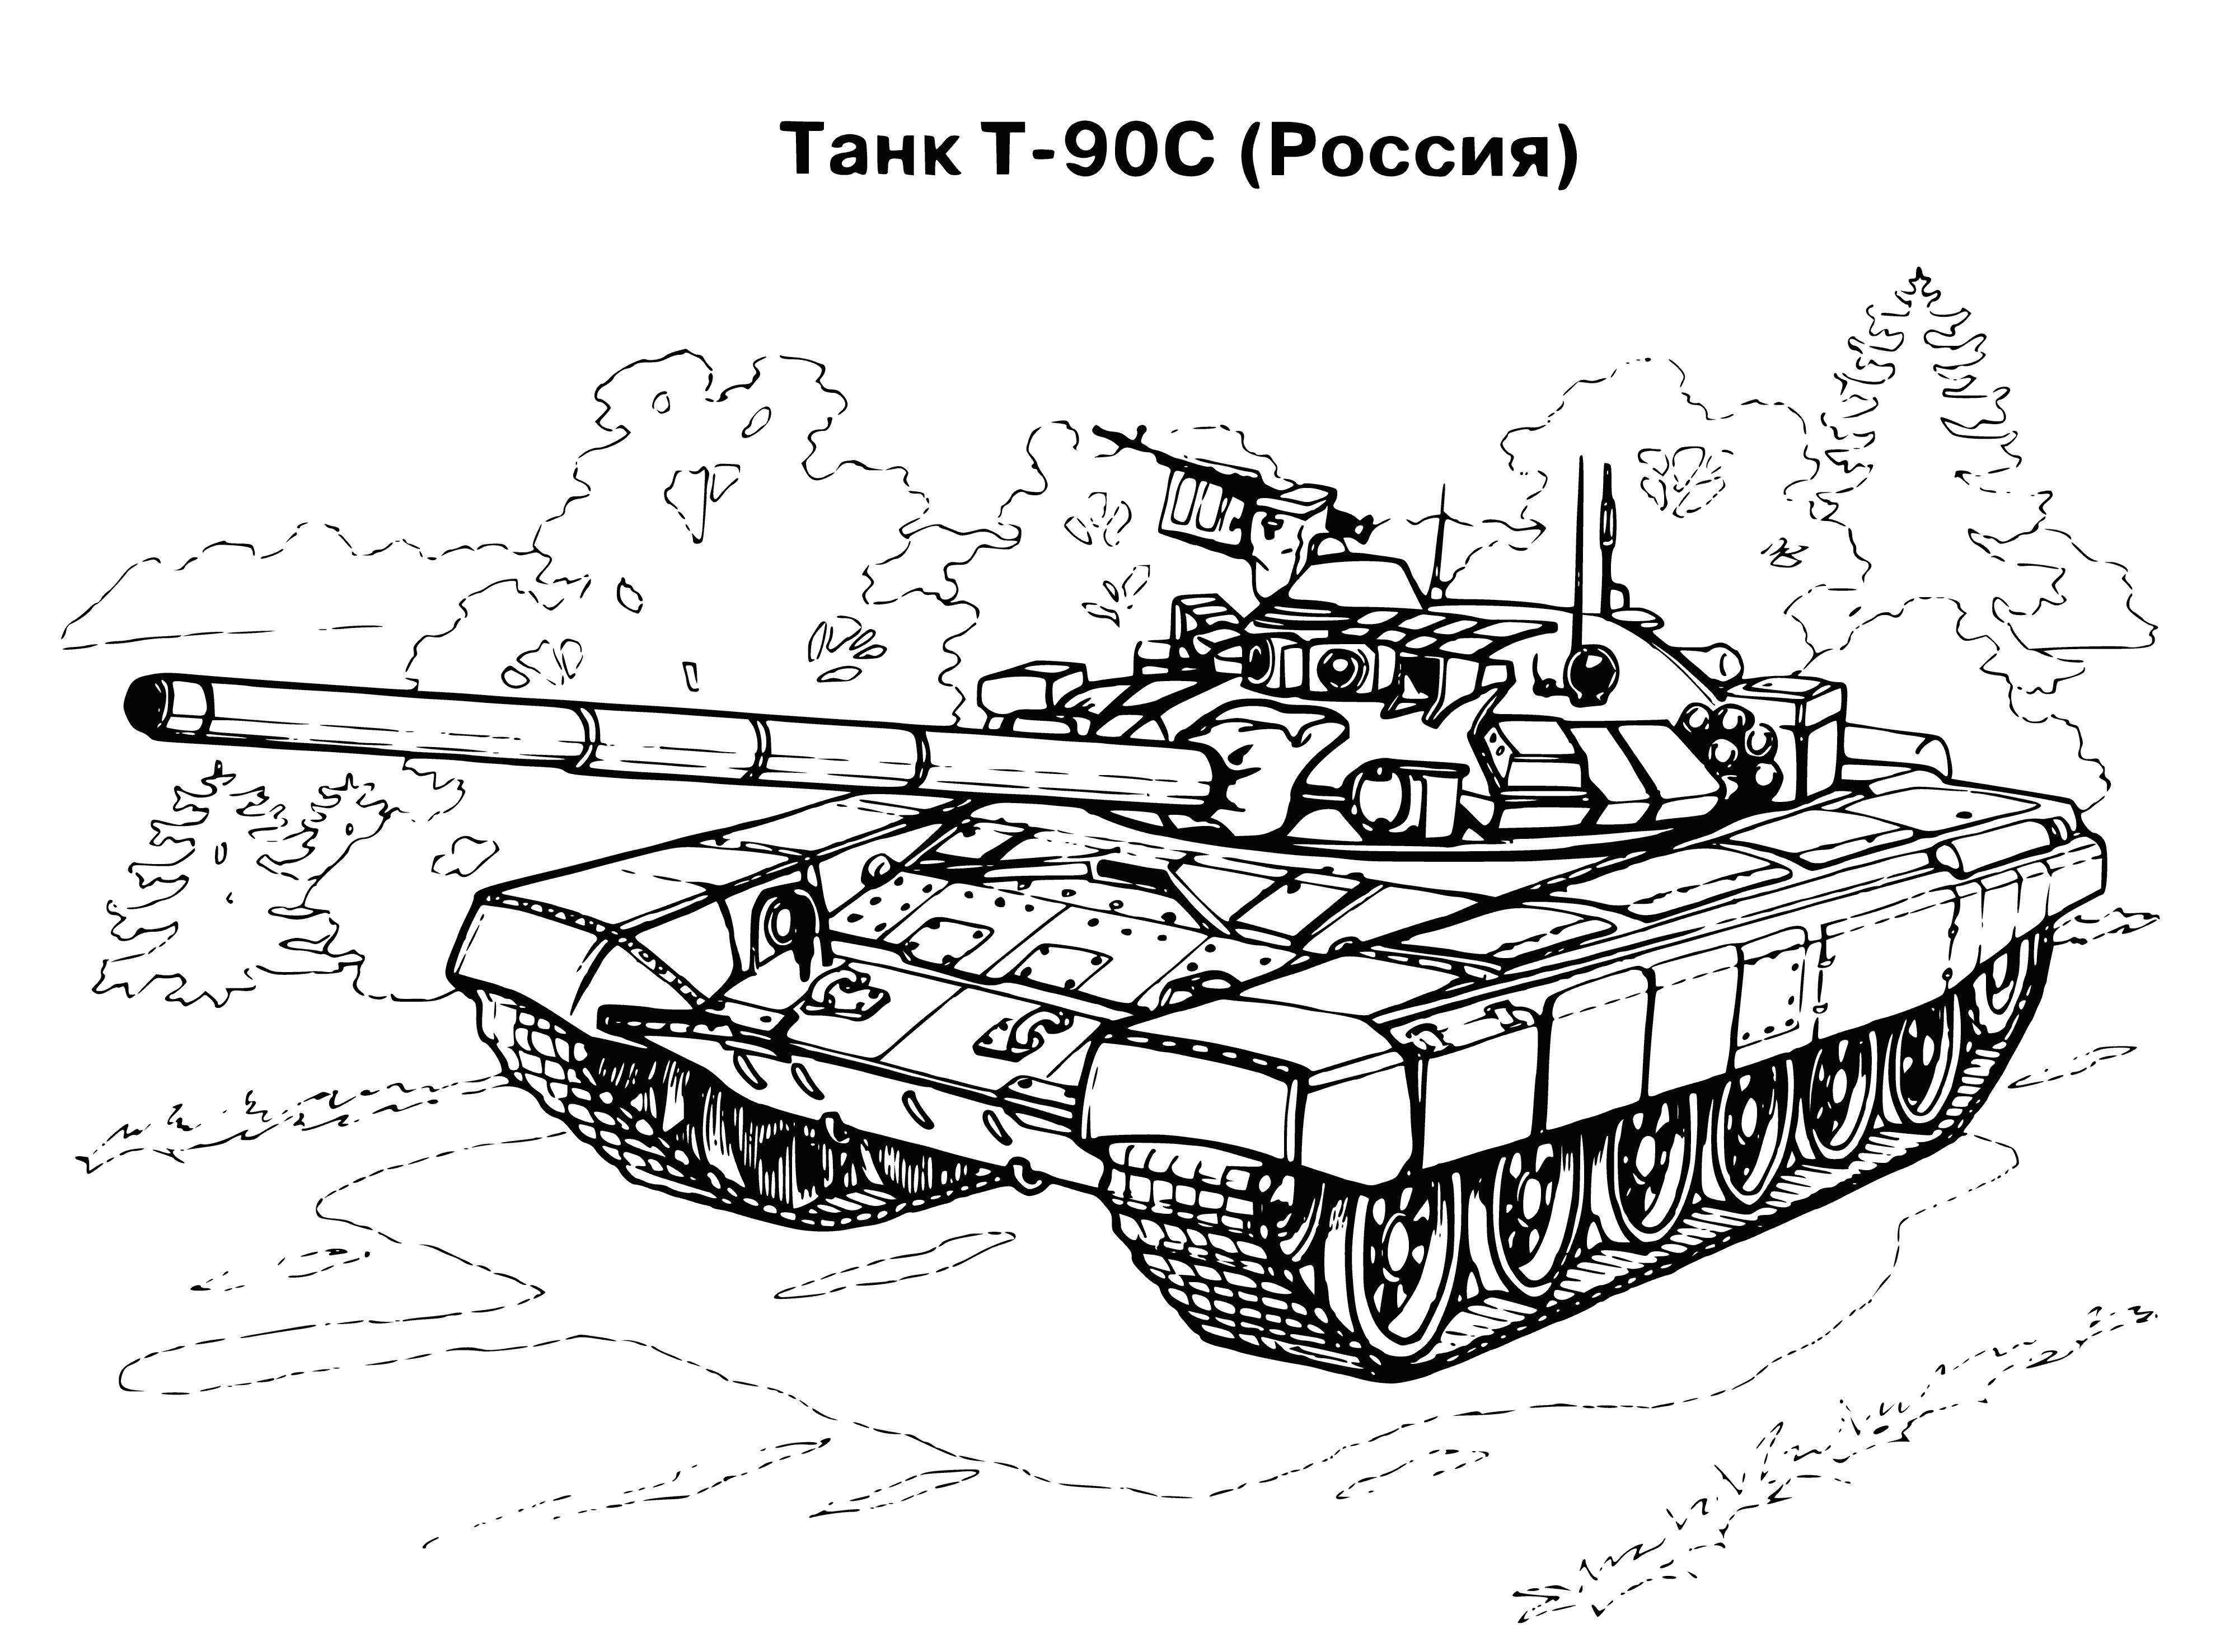 coloring page: Large tank w/ gun turret & Russian flag parked in field; trees & houses in background.